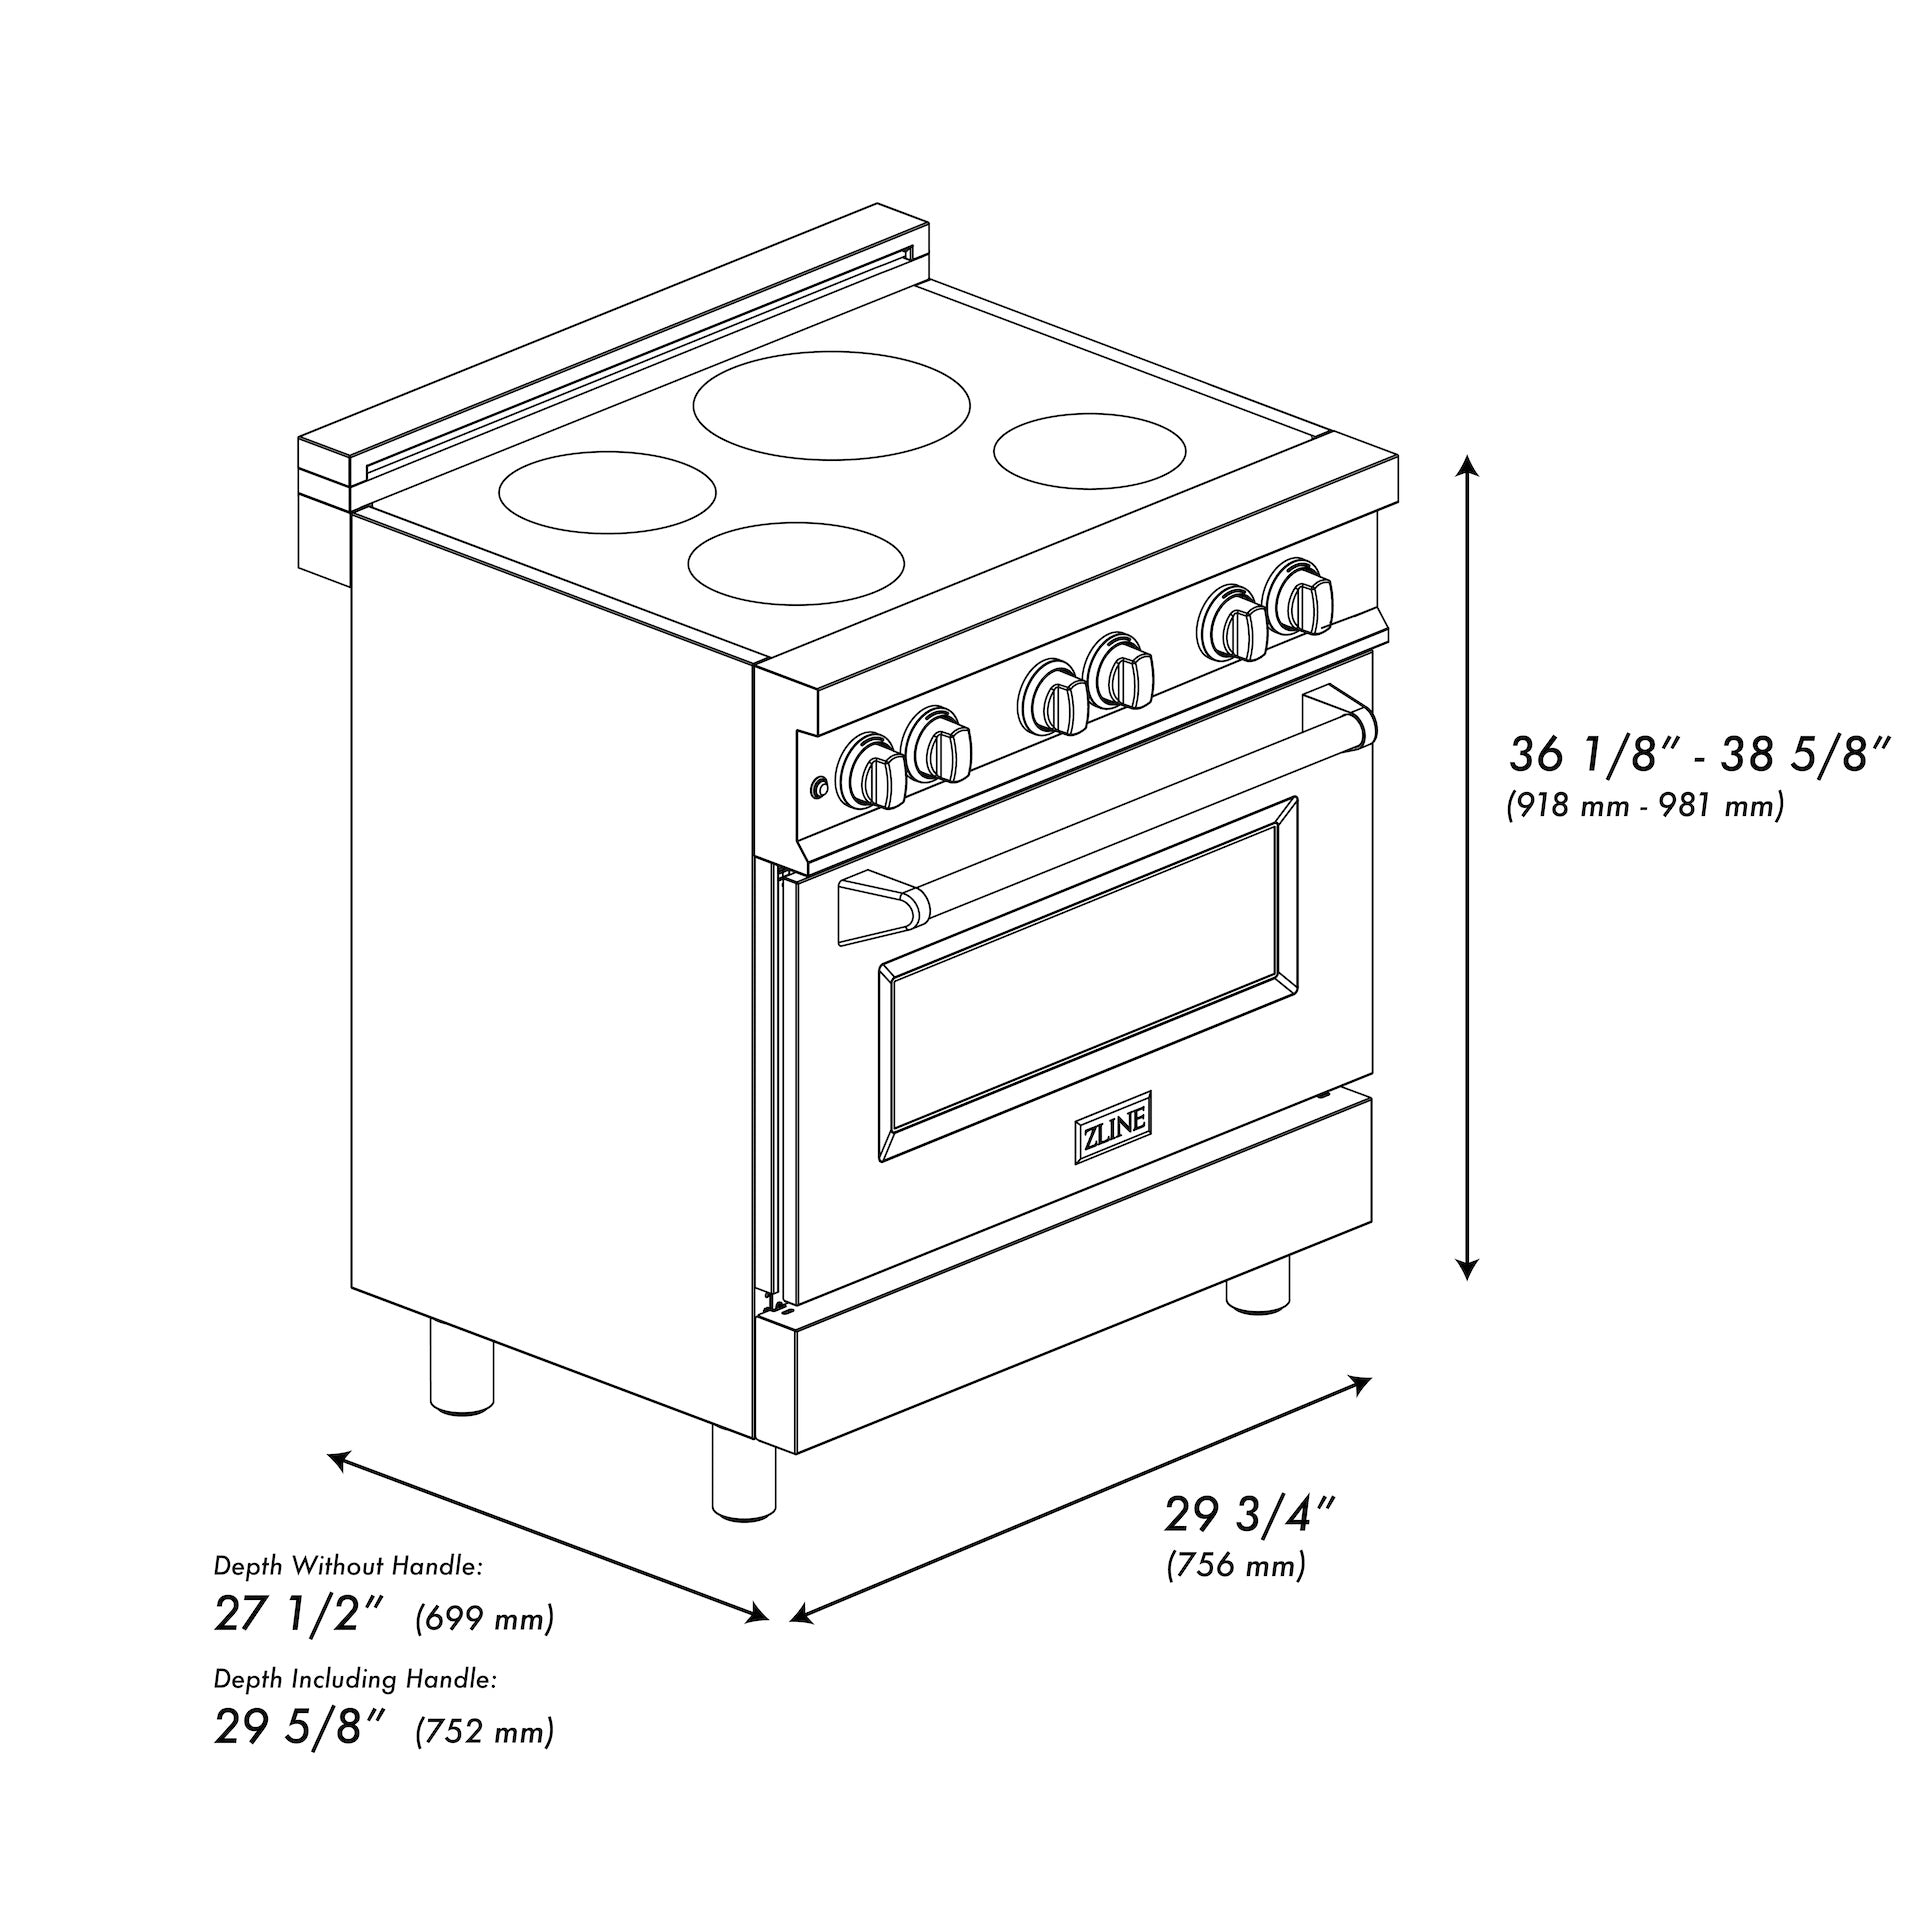 ZLINE 30 in. 4.0 cu. ft. Induction Range with a 4 Induction Element Stove and Electric Oven in Stainless Steel (RAIND-30) dimensional diagram with measurements.